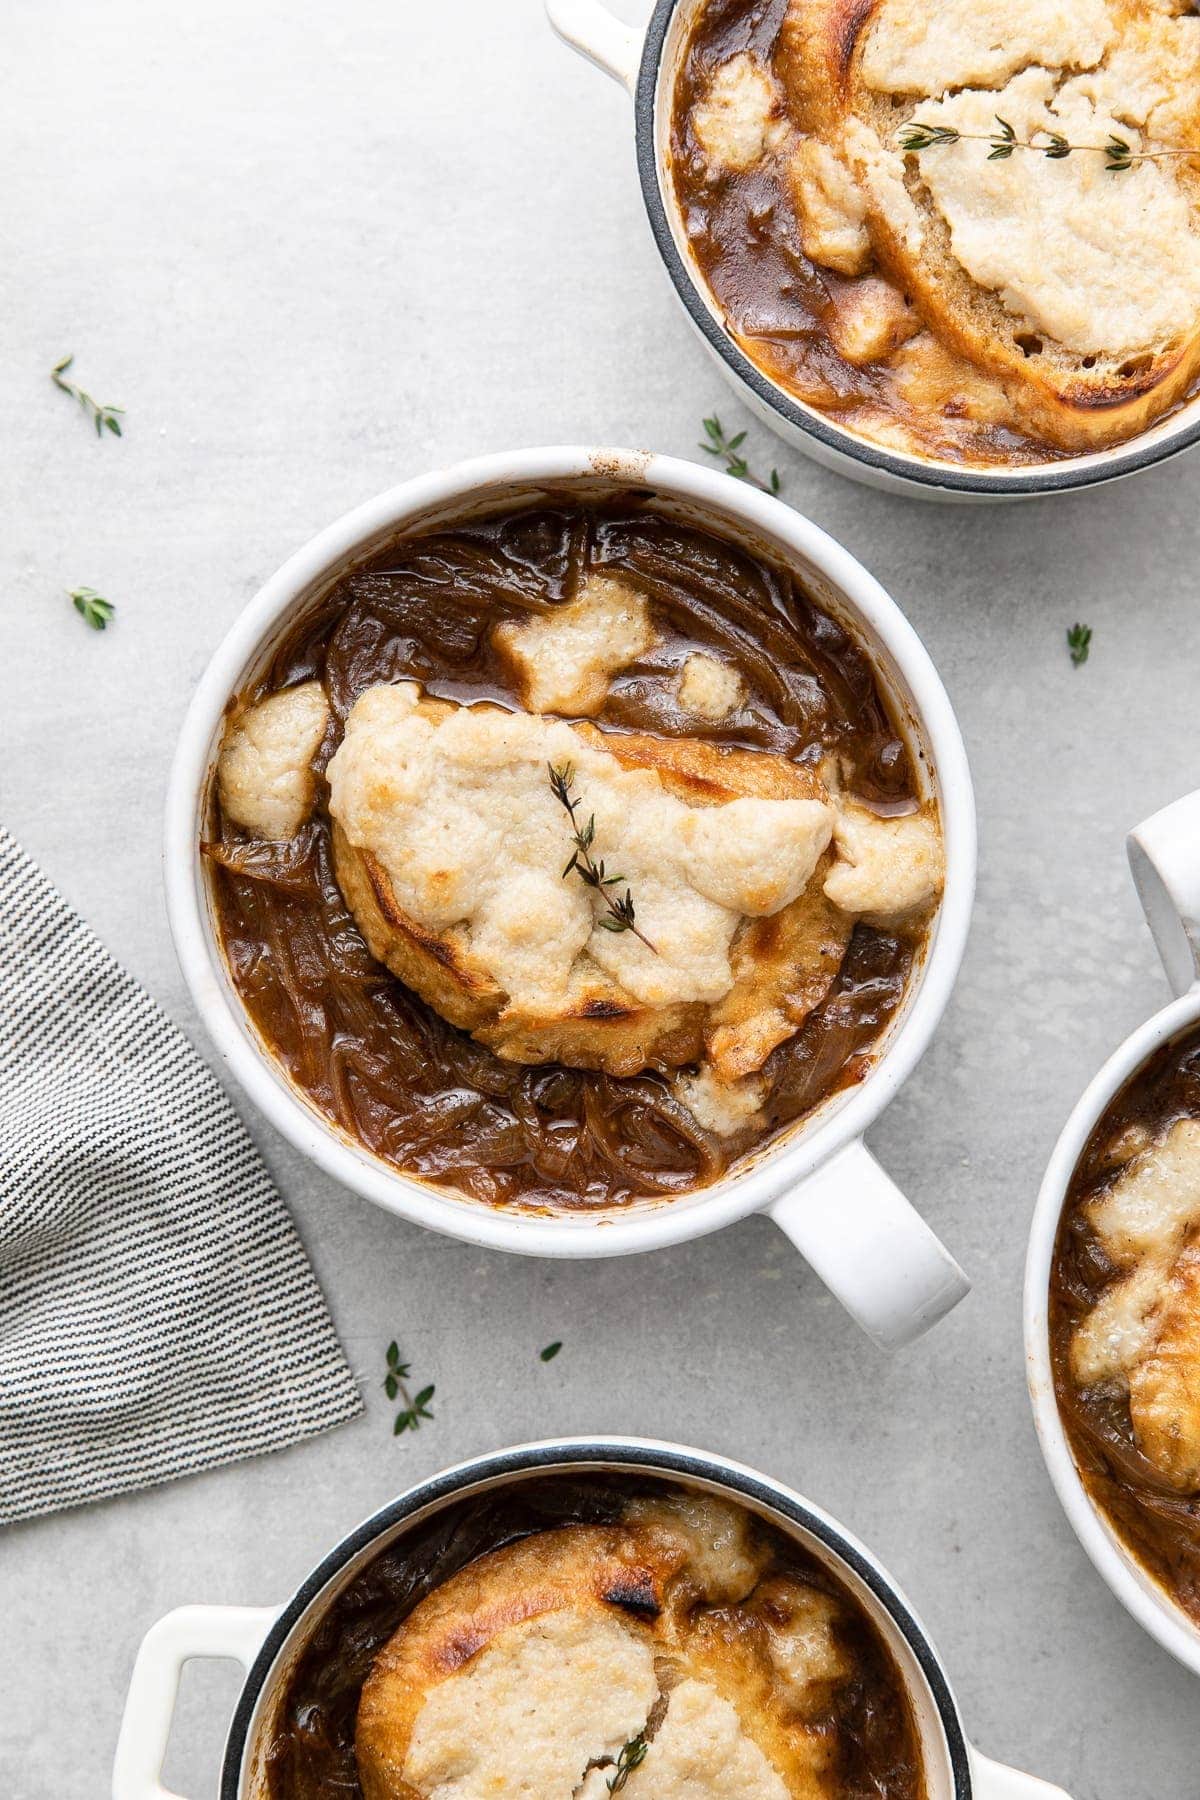 Bowl of homemade Vegan French Onion Soup garnished with thyme